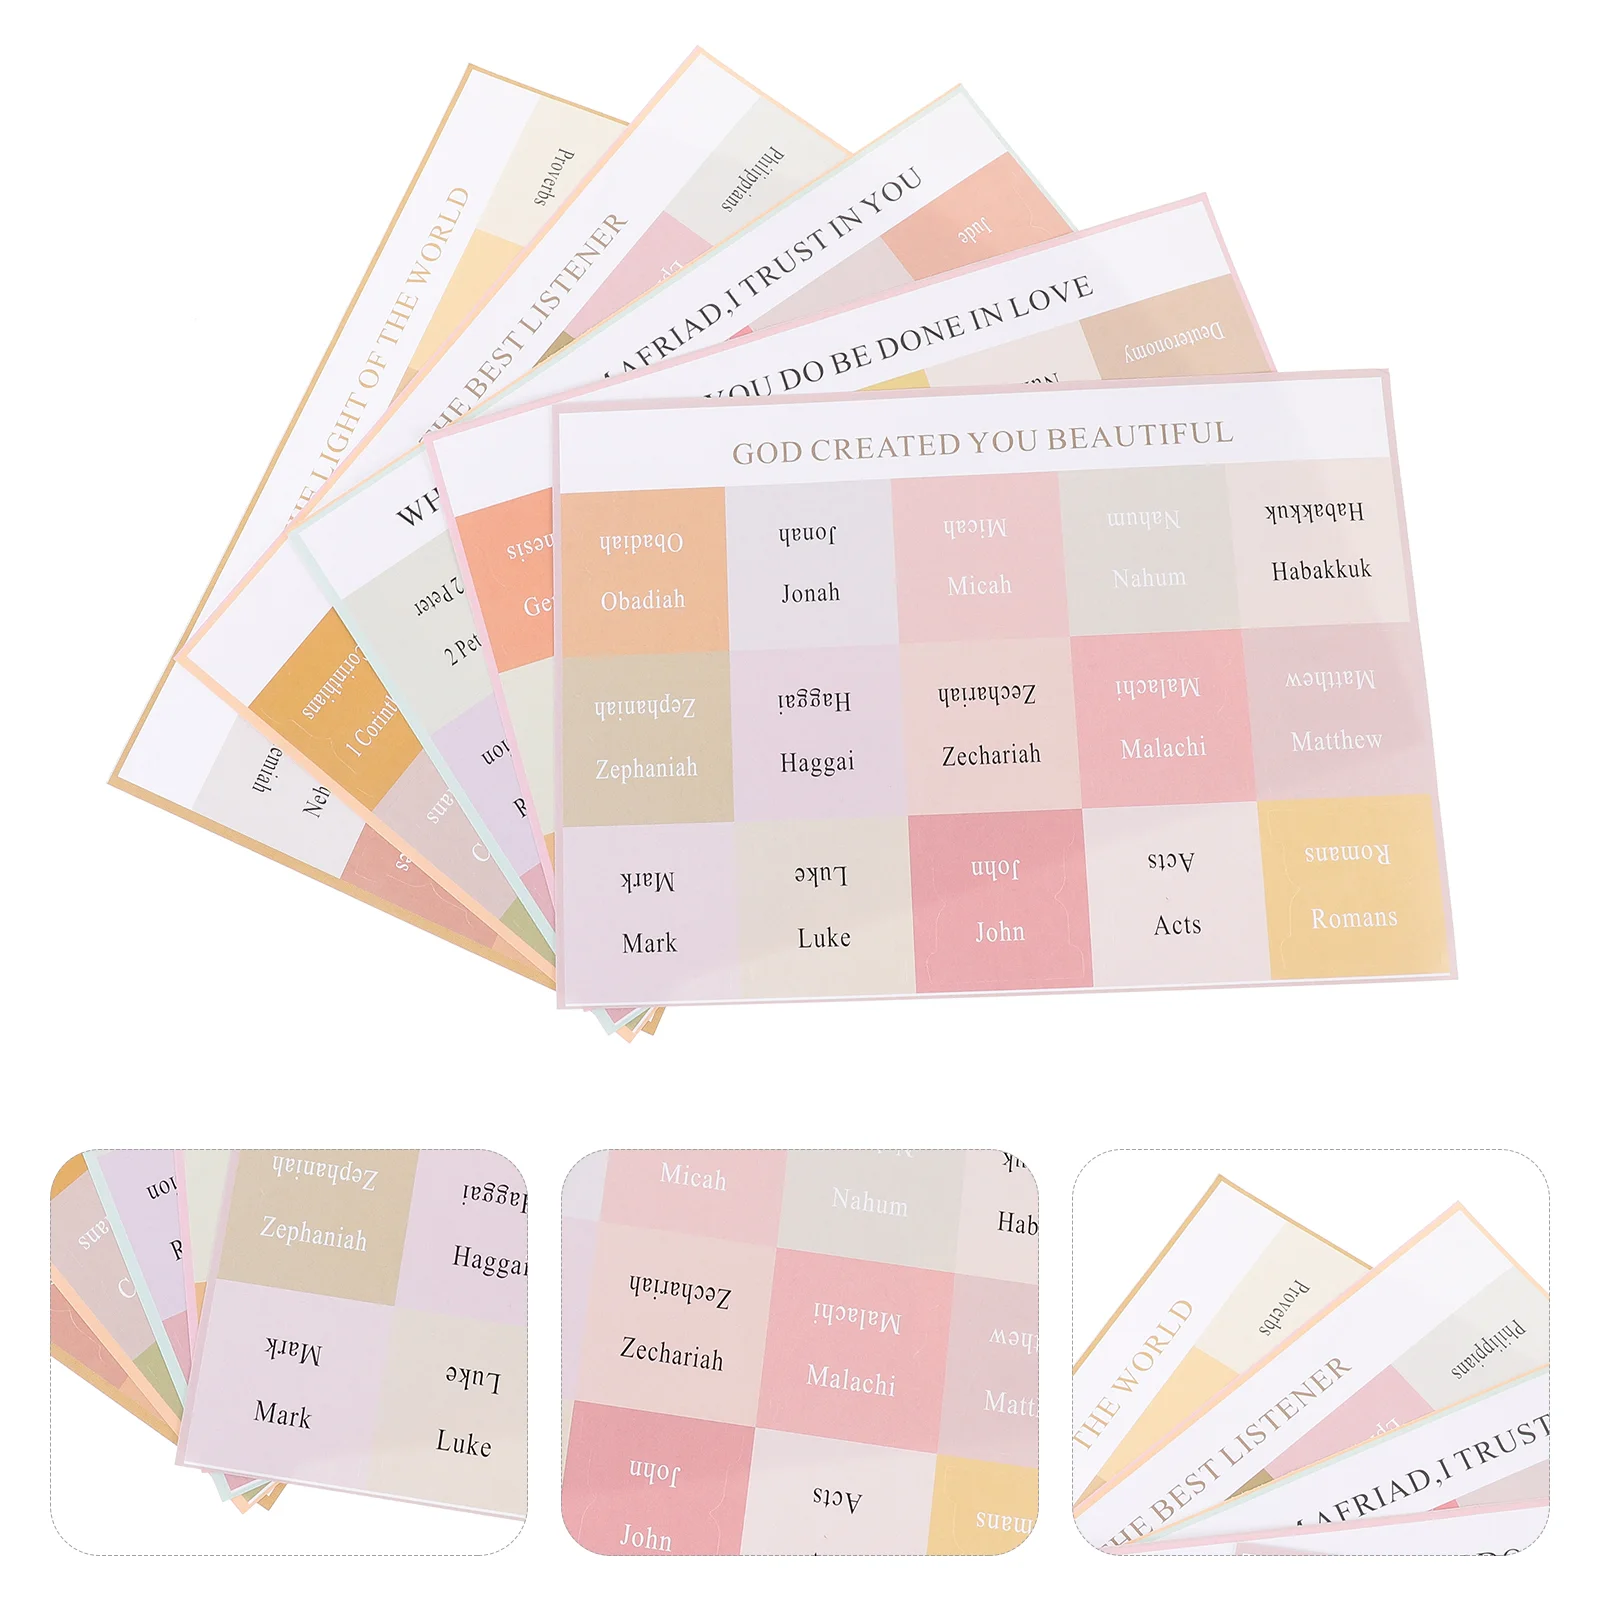 5 Sheets of Bible Index Tabs Paper Bible Tabs Bible Study Tabs Convenient Bible Tabs Colored Bible Stickers 12 sheets sun and moon index sticker calendar stickers convenient book tabs daily plan tags month use planner paper calendars